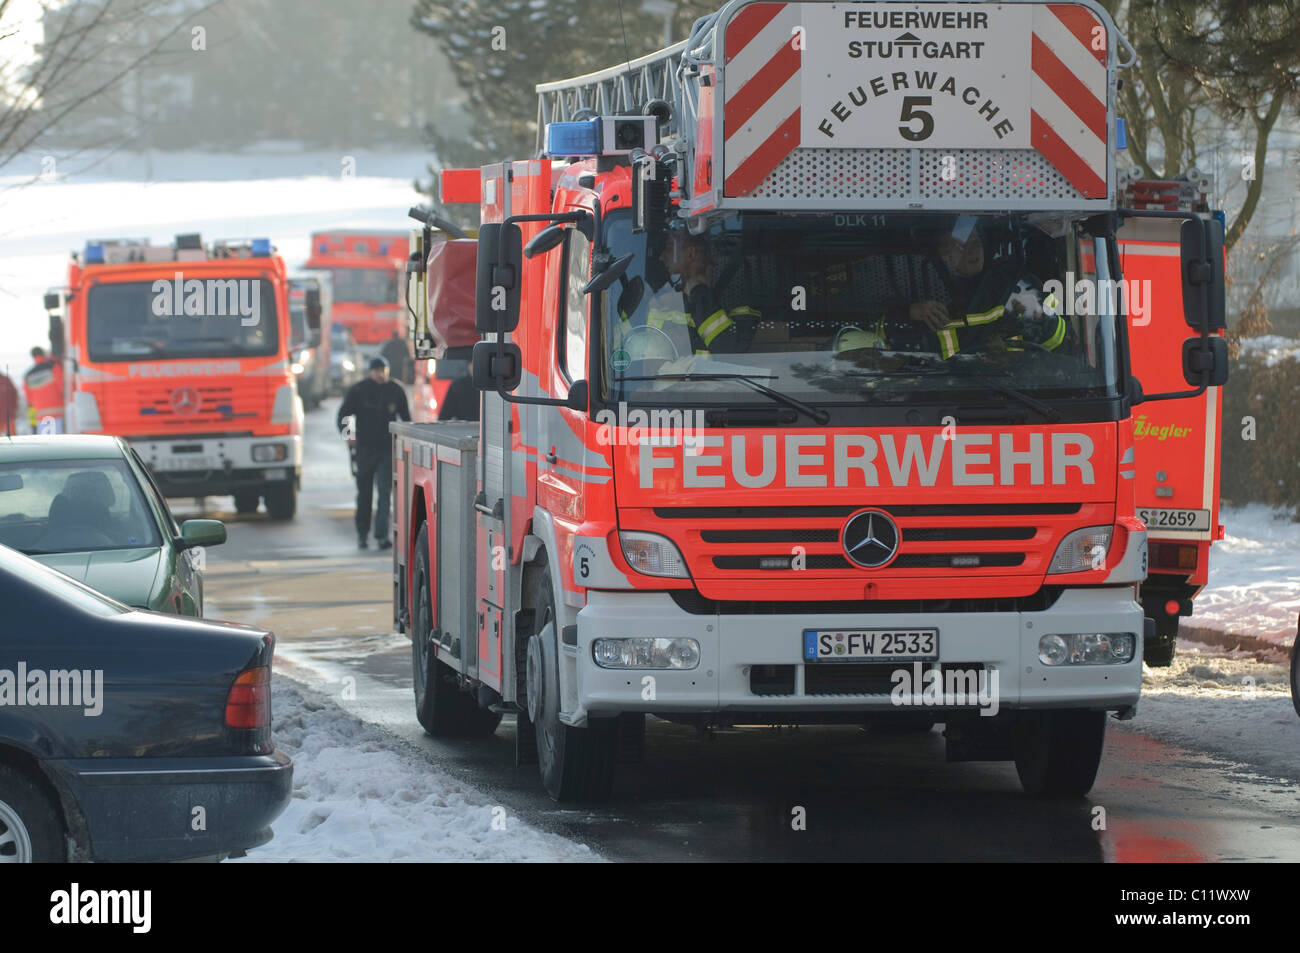 The fire department rescue workers in action after a house fire, Stuttgart, Baden-Wuerttemberg, Germany, Europe Stock Photo